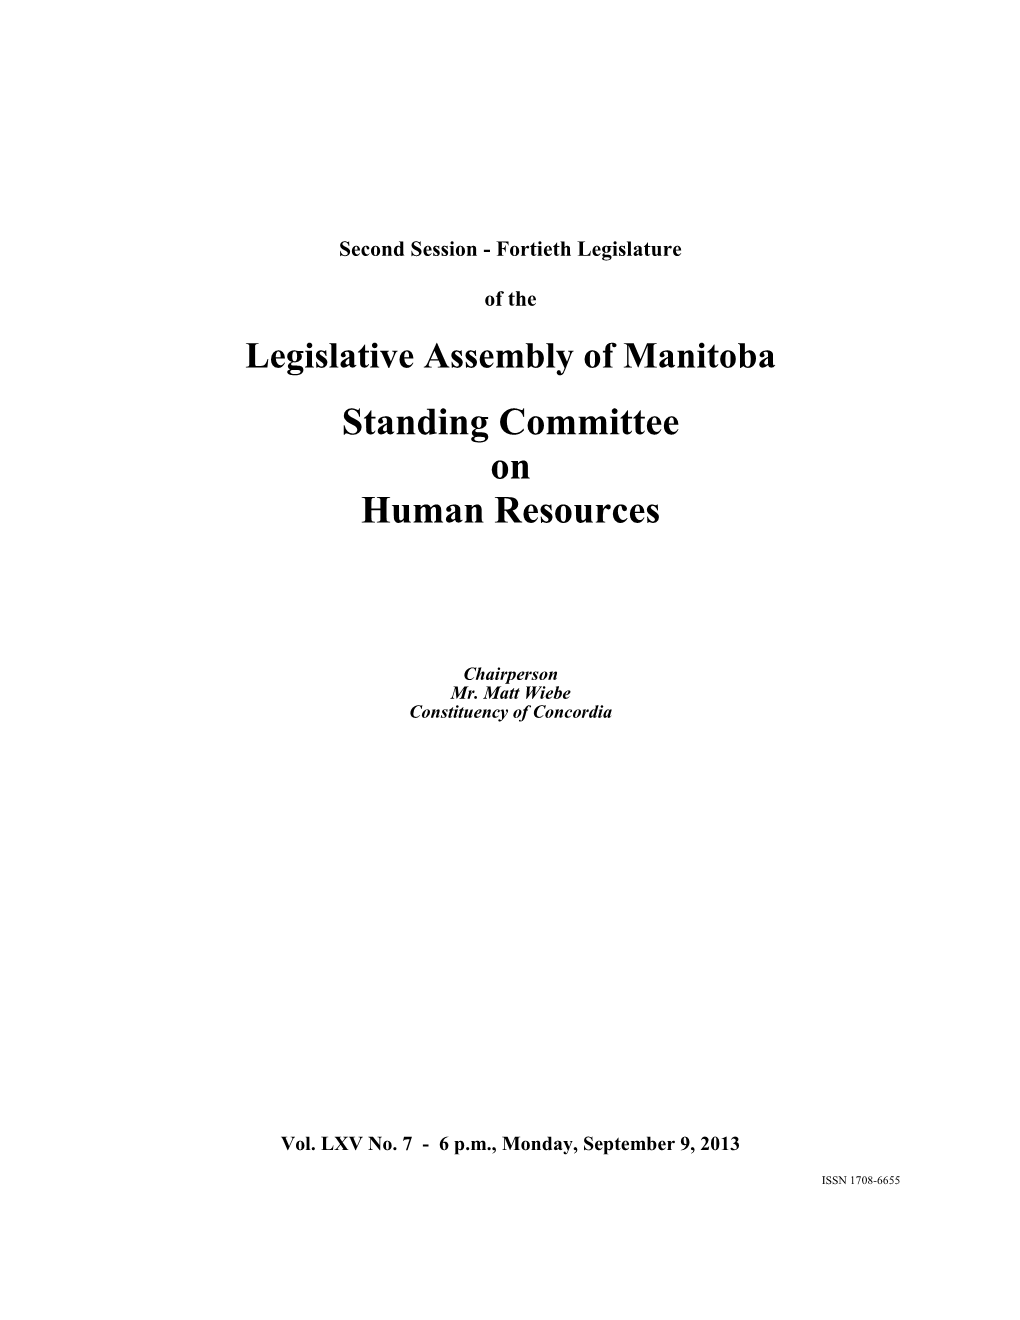 Legislative Assembly of Manitoba Standing Committee on Human